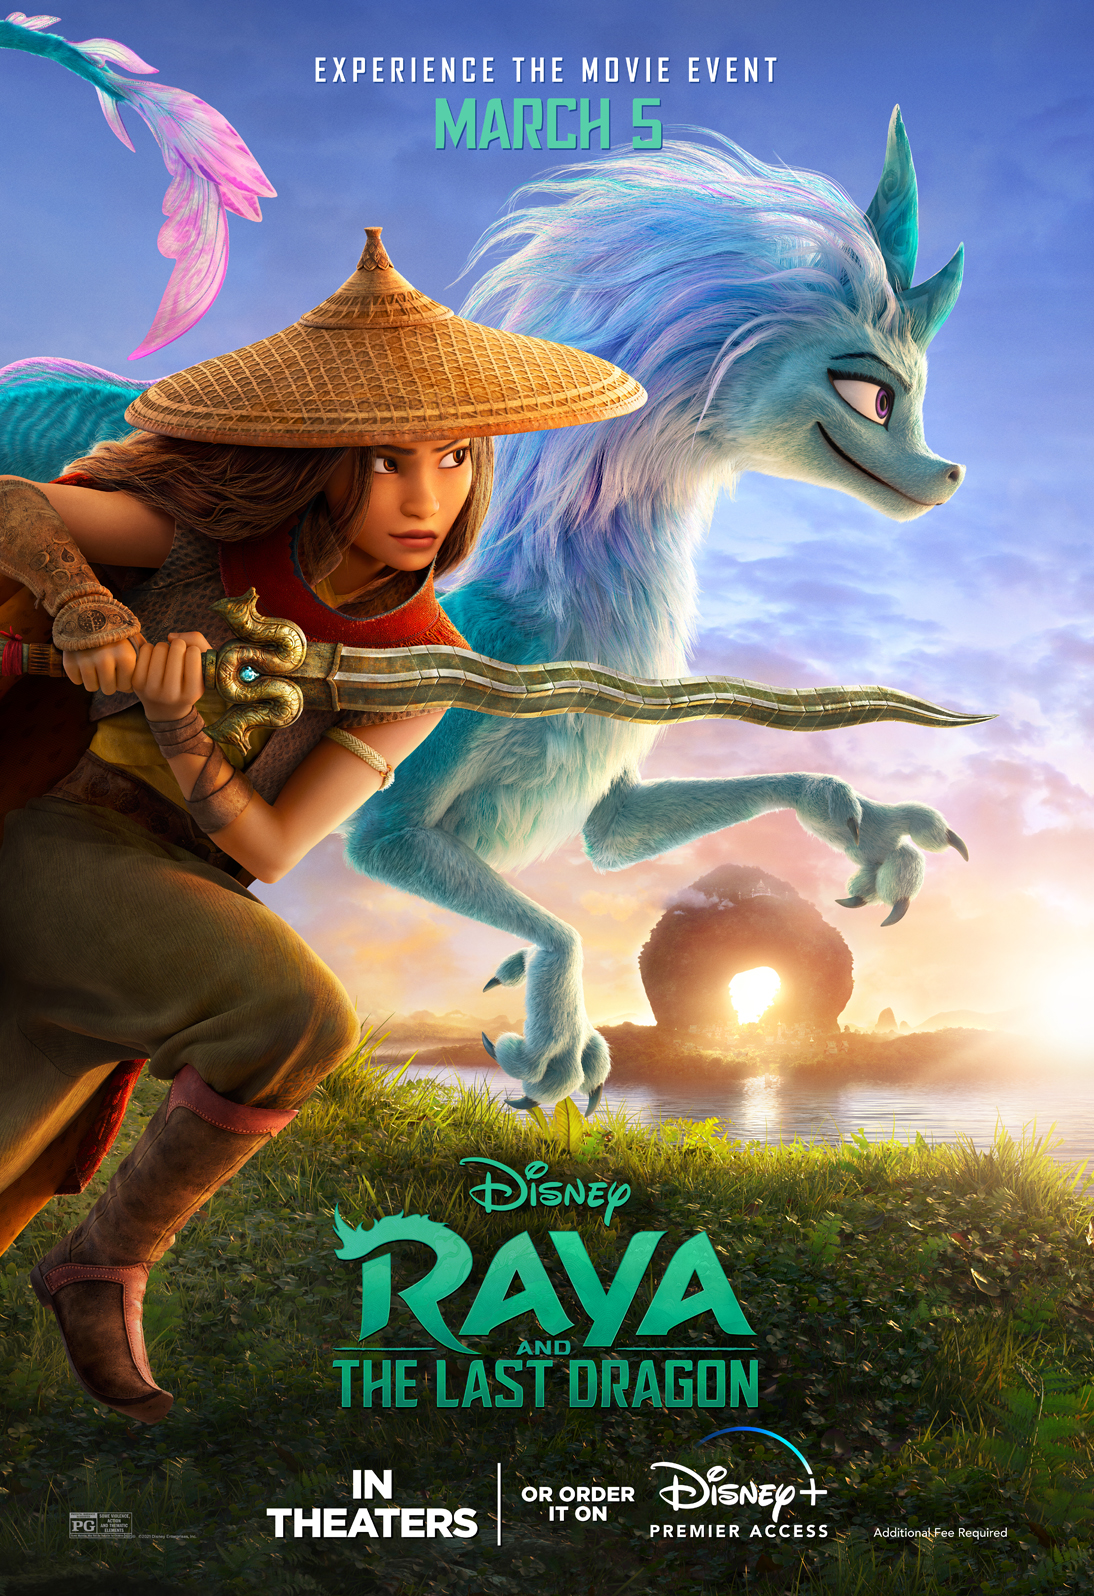 GIVEAWAY: Celebrate the Release of Disney's Raya and the Last Dragon by Winning a $25 Disney Gift Card